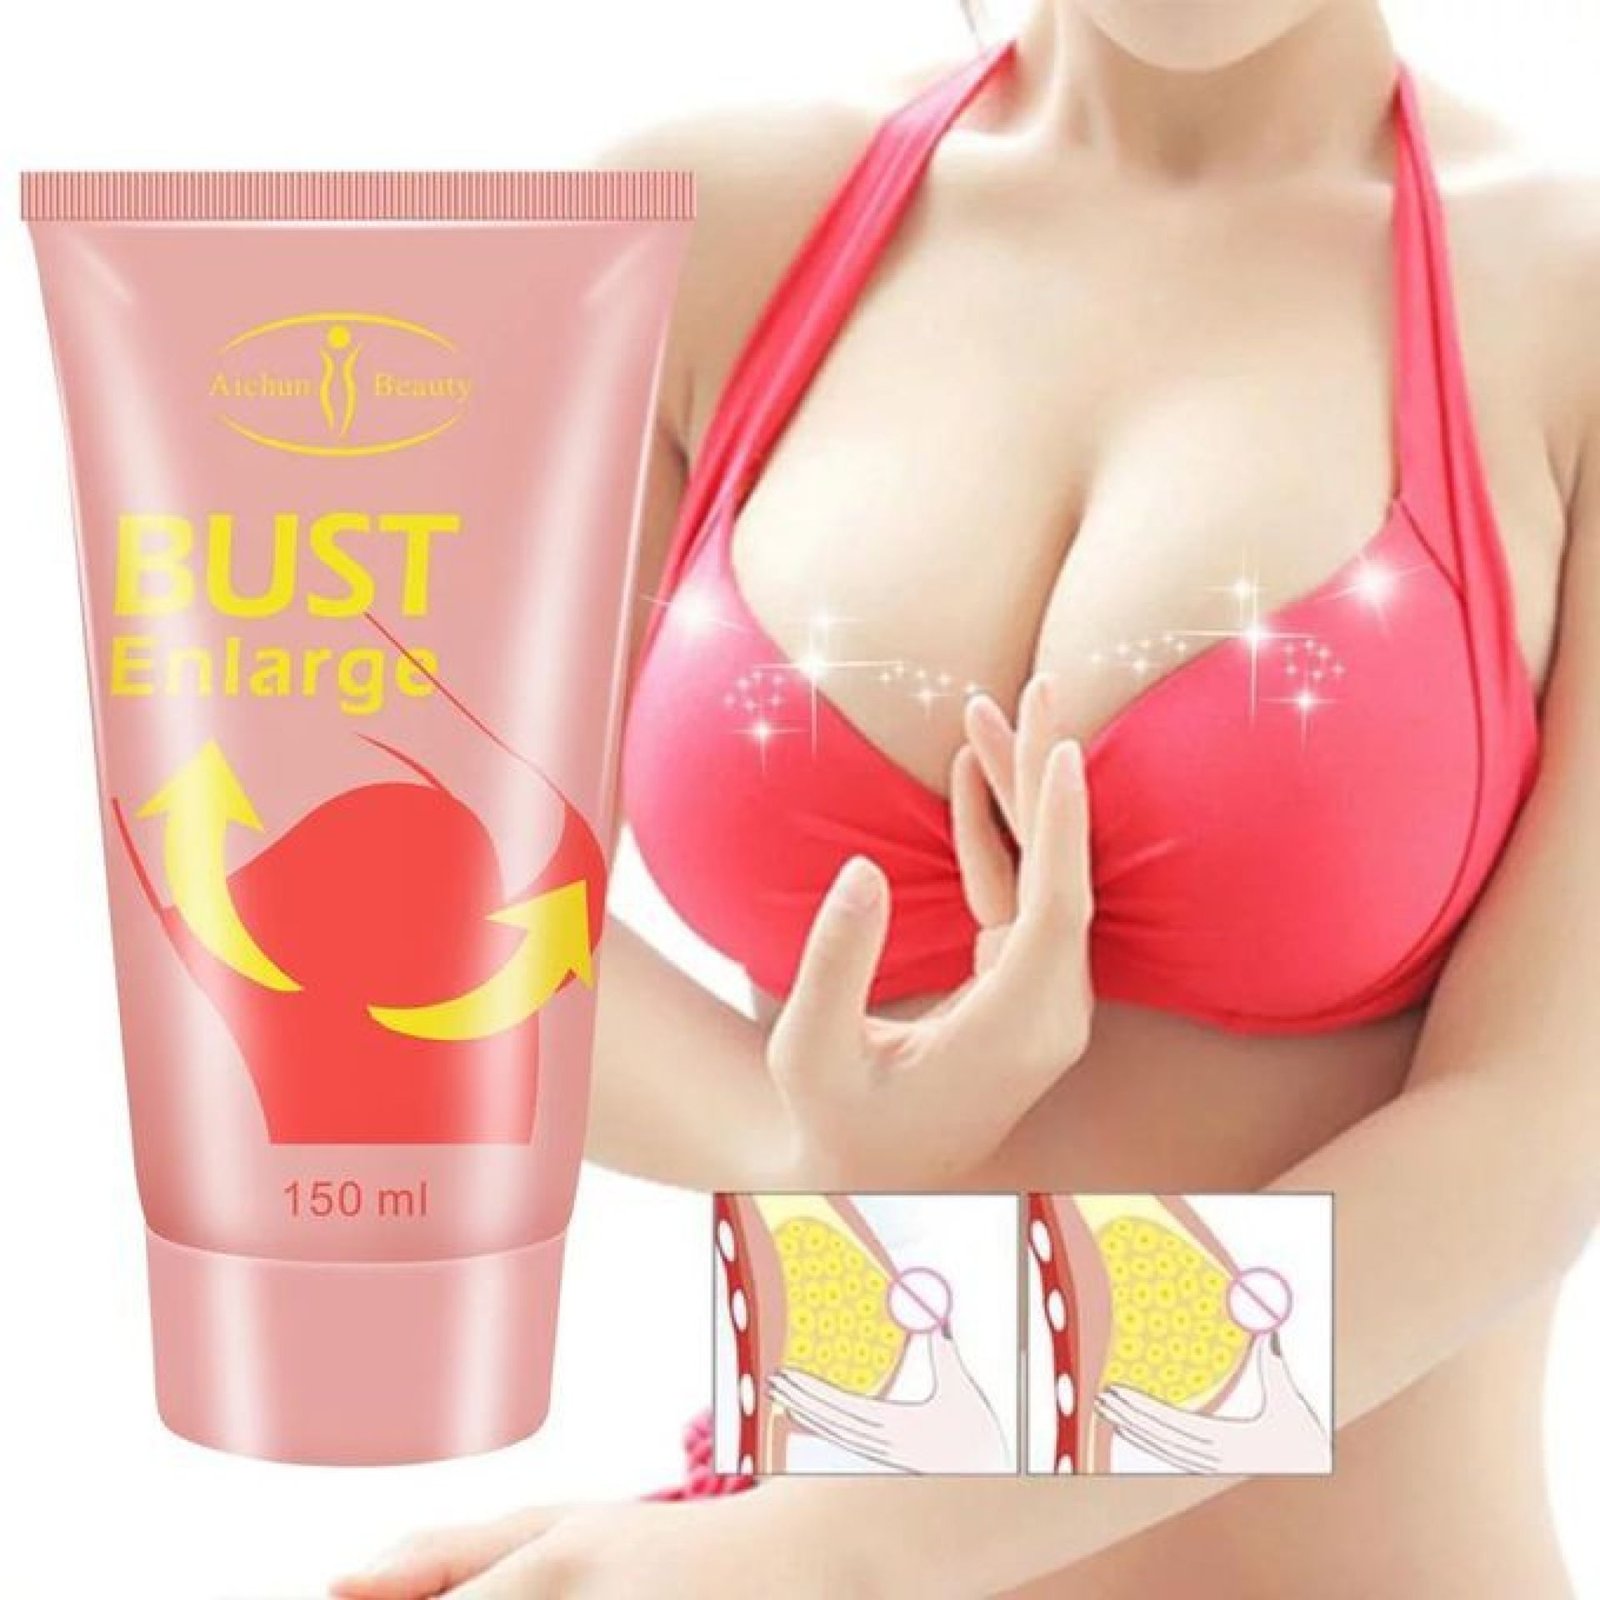 Buy Aichun Beauty Bust Enlarge Breast Cream - 150ml at Rs. 2200 from Likeshop.pk